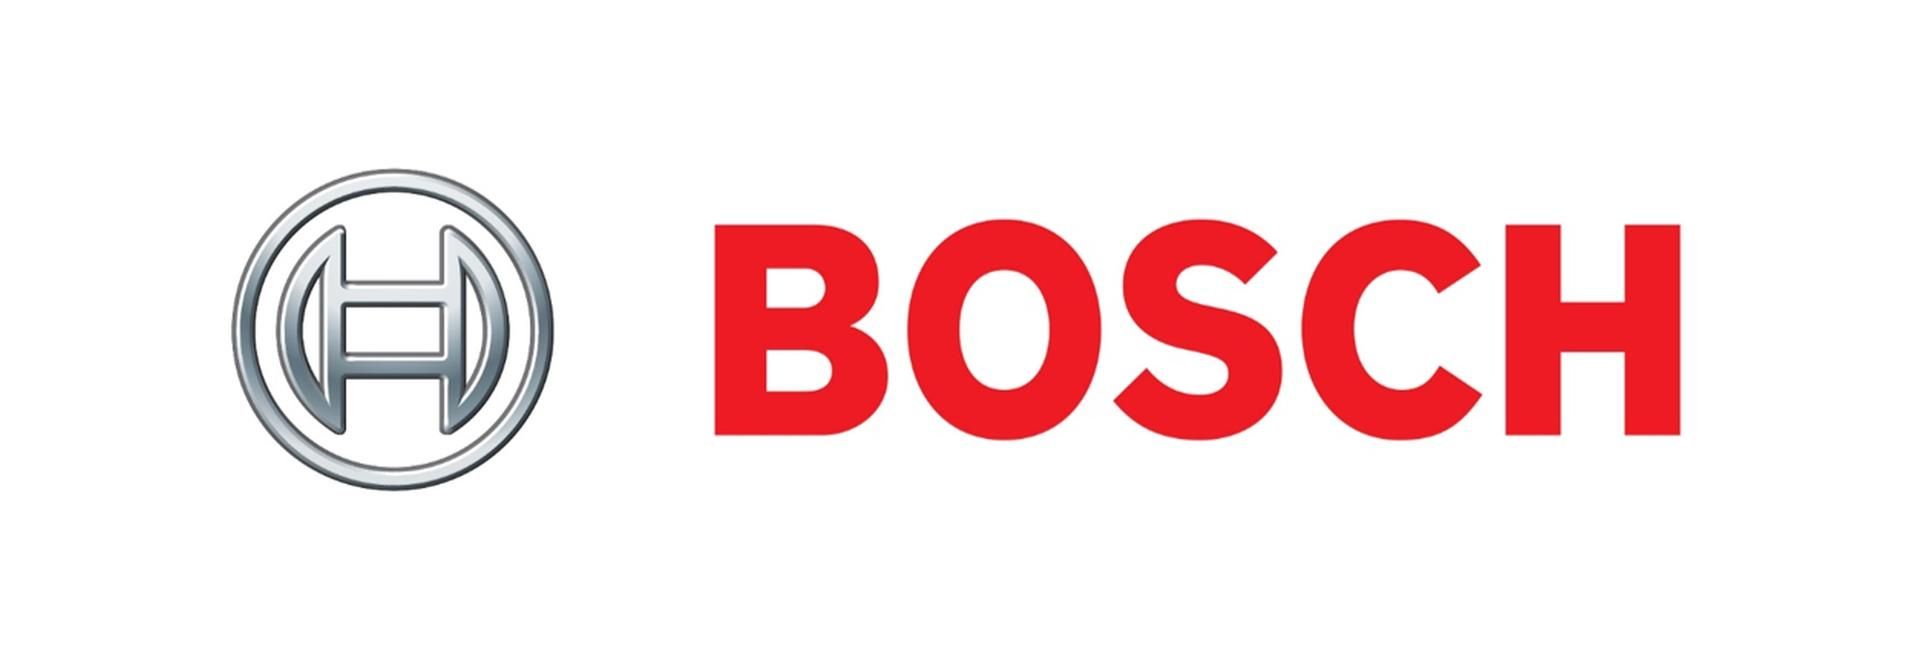 Bosch has chosen Hungary for the location of its Service Centre - VIDEO REPORT